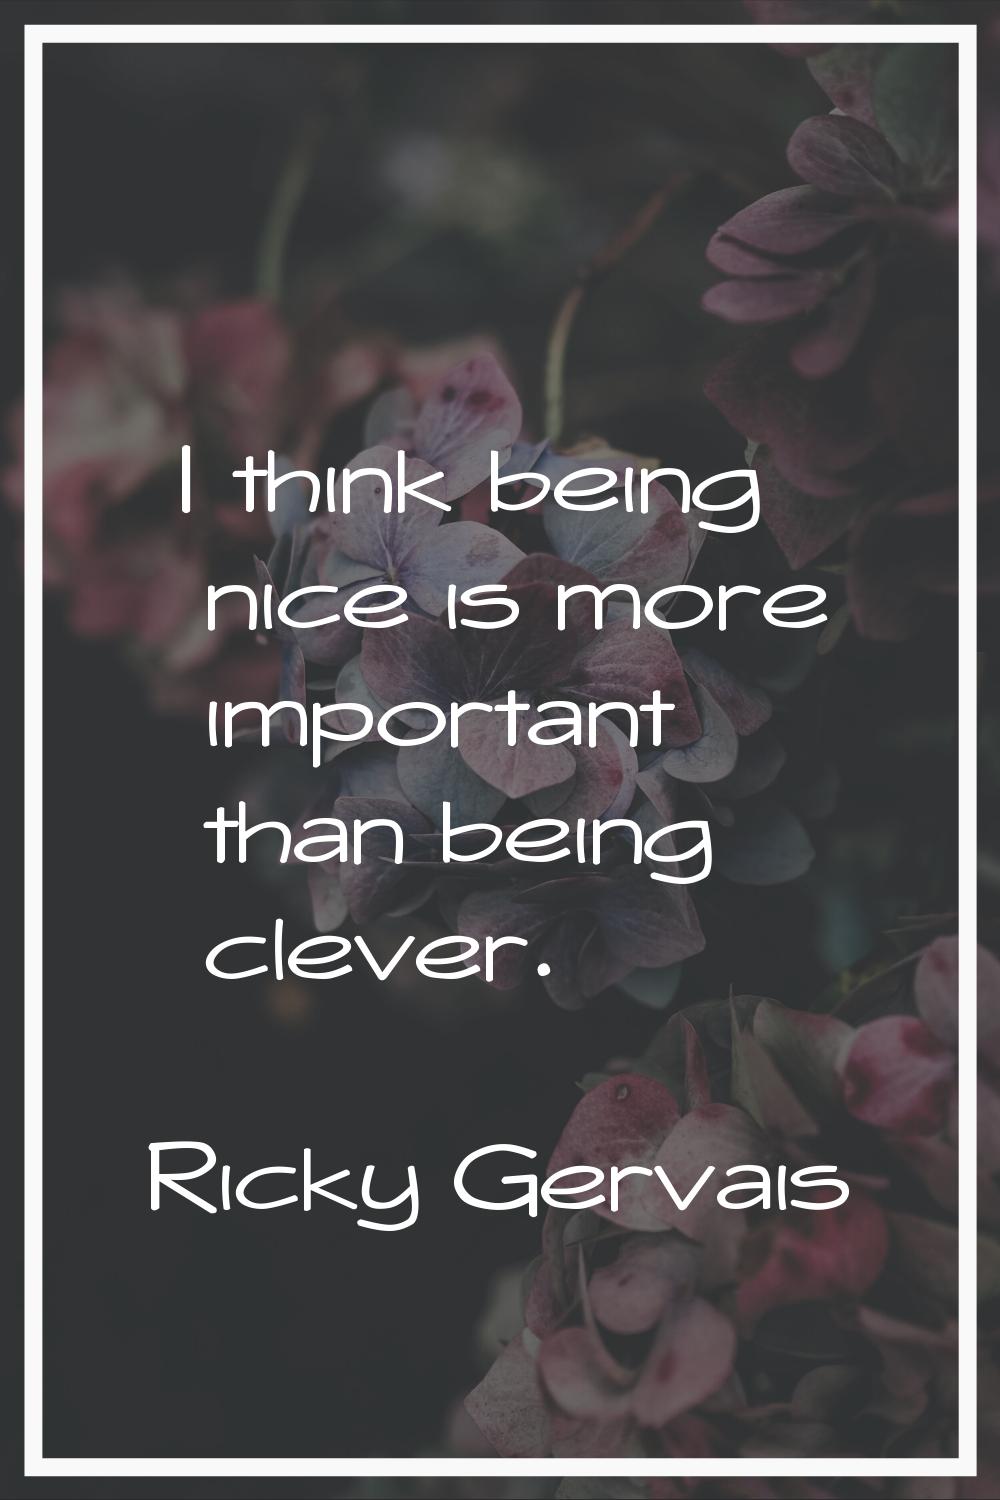 I think being nice is more important than being clever.